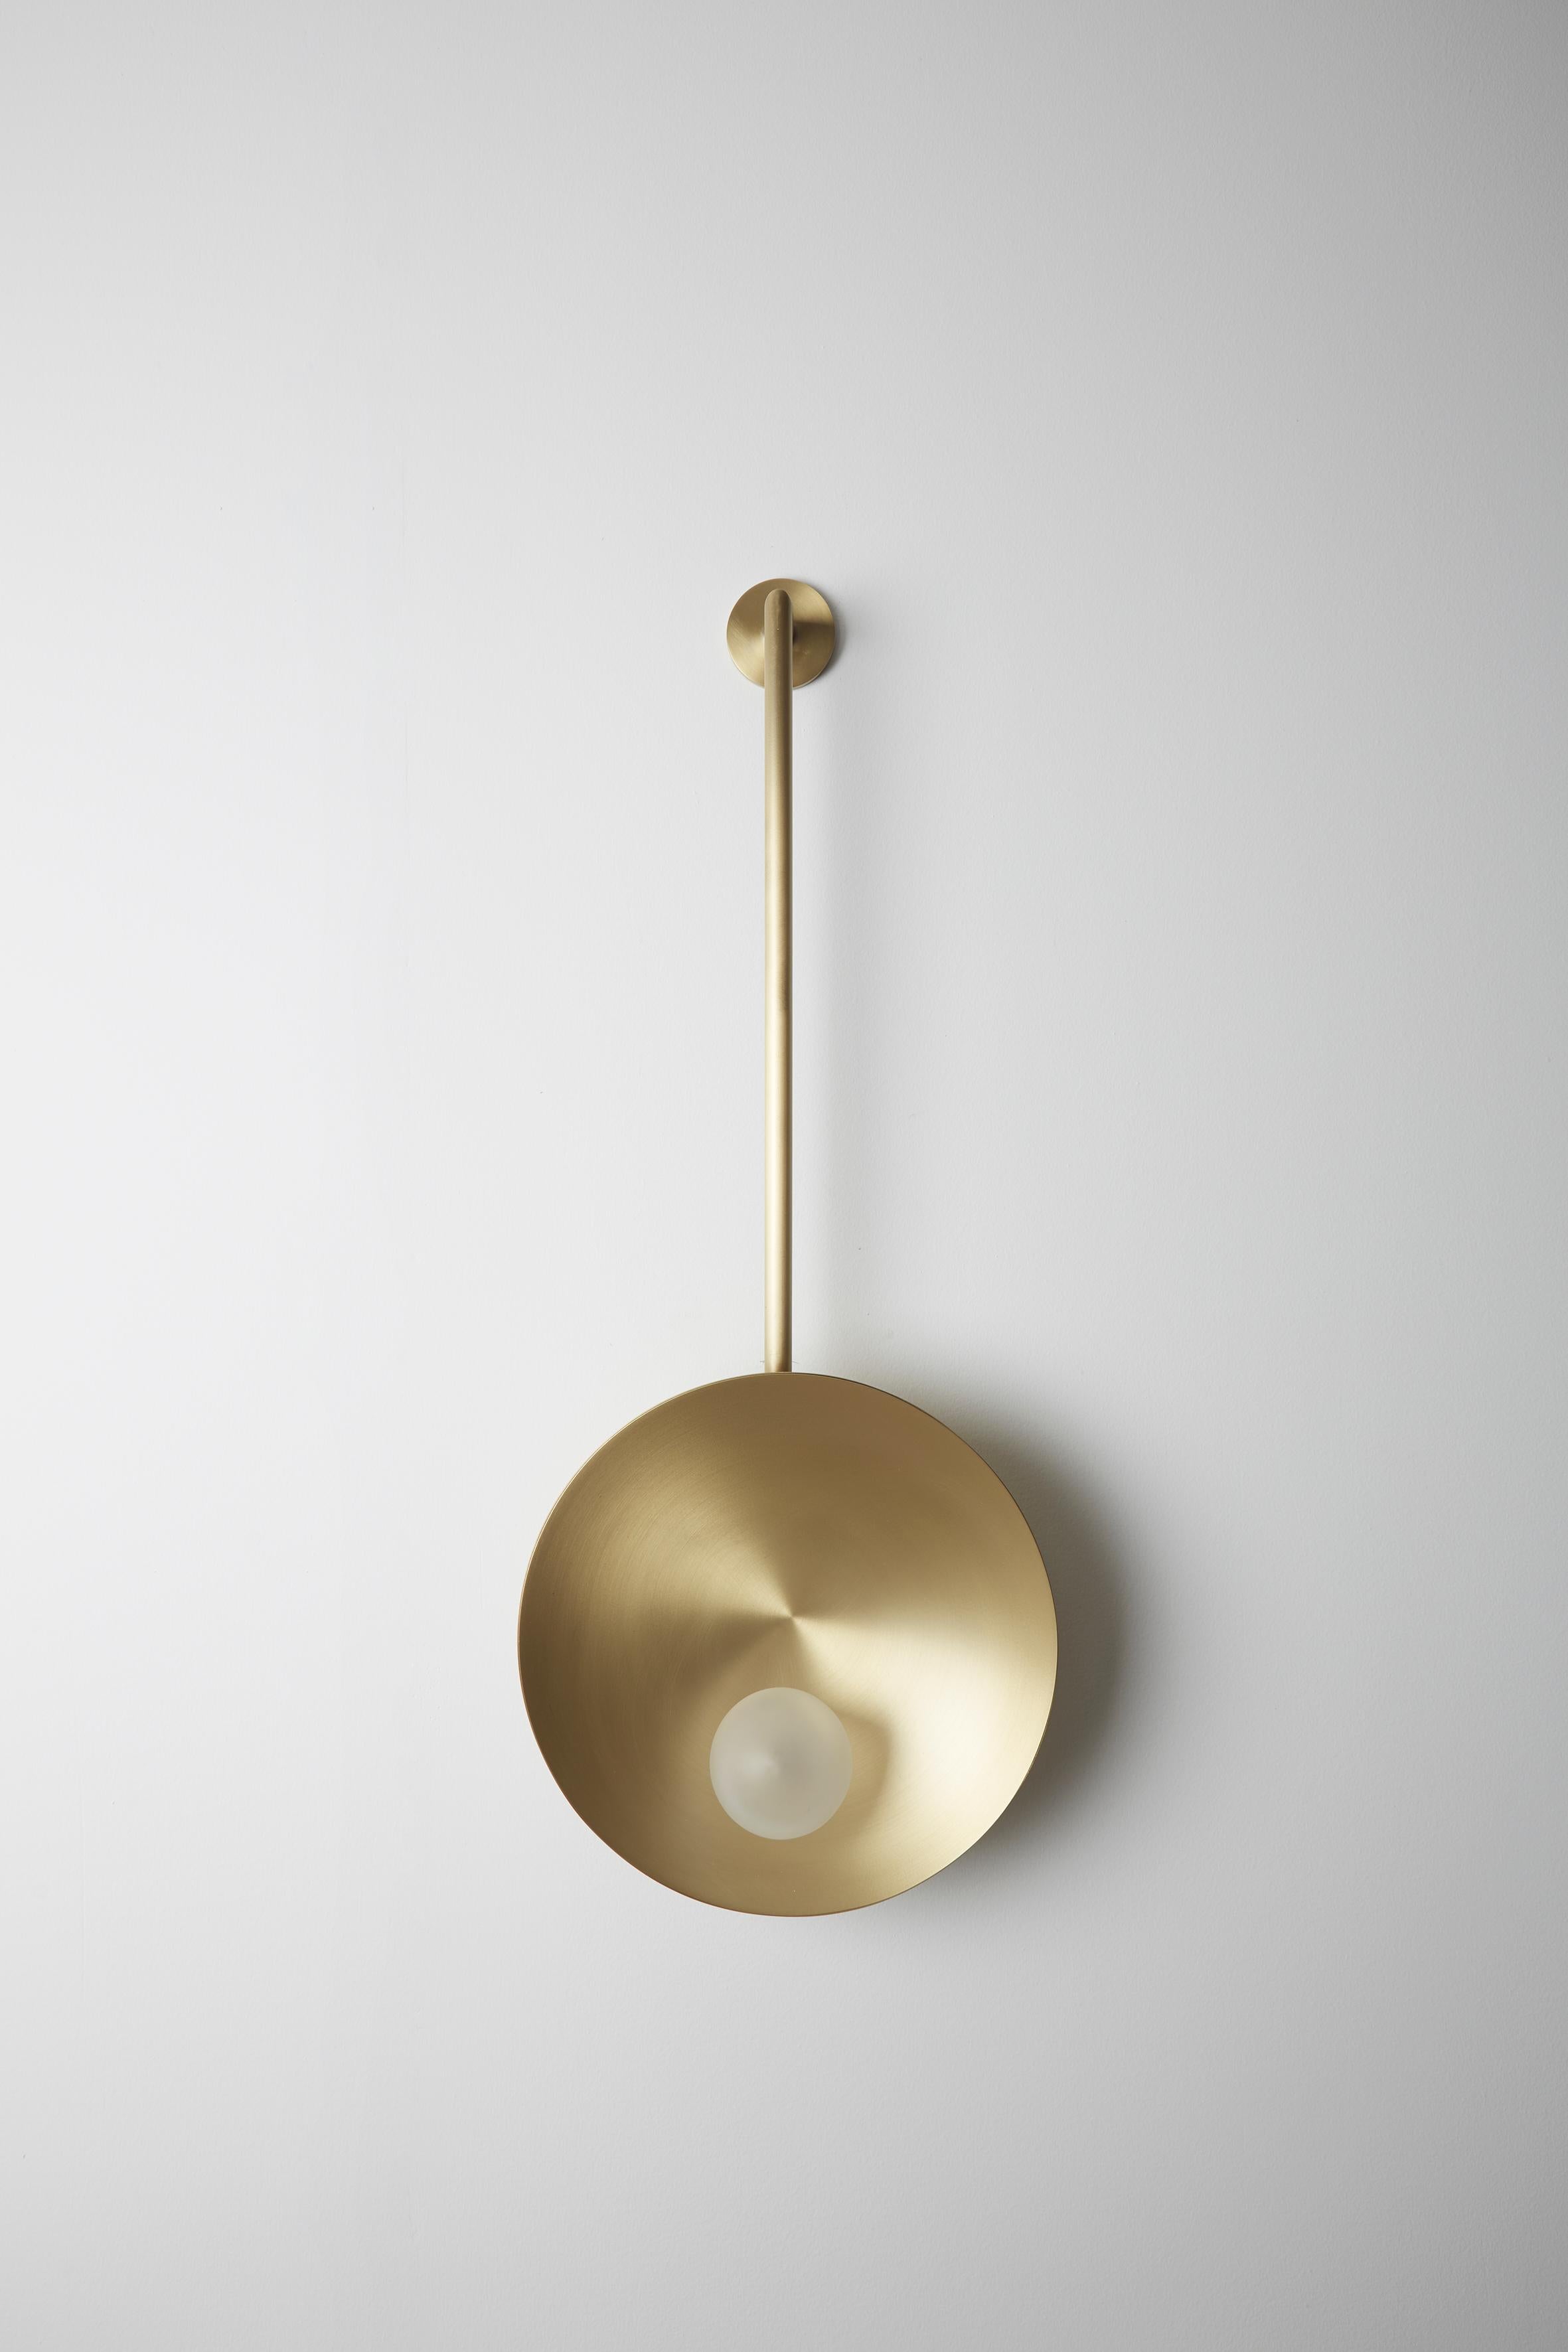 Oyster wall mounted brass, Carla Baz
Dimensions: ø 30 x H 78 x D 14 cm
Weight: 2 kg
Material: Brass, blown satin glass globes

Oyster is a series of sculptural lighting pieces that were developed in 2016. Wanting to explore the idea of